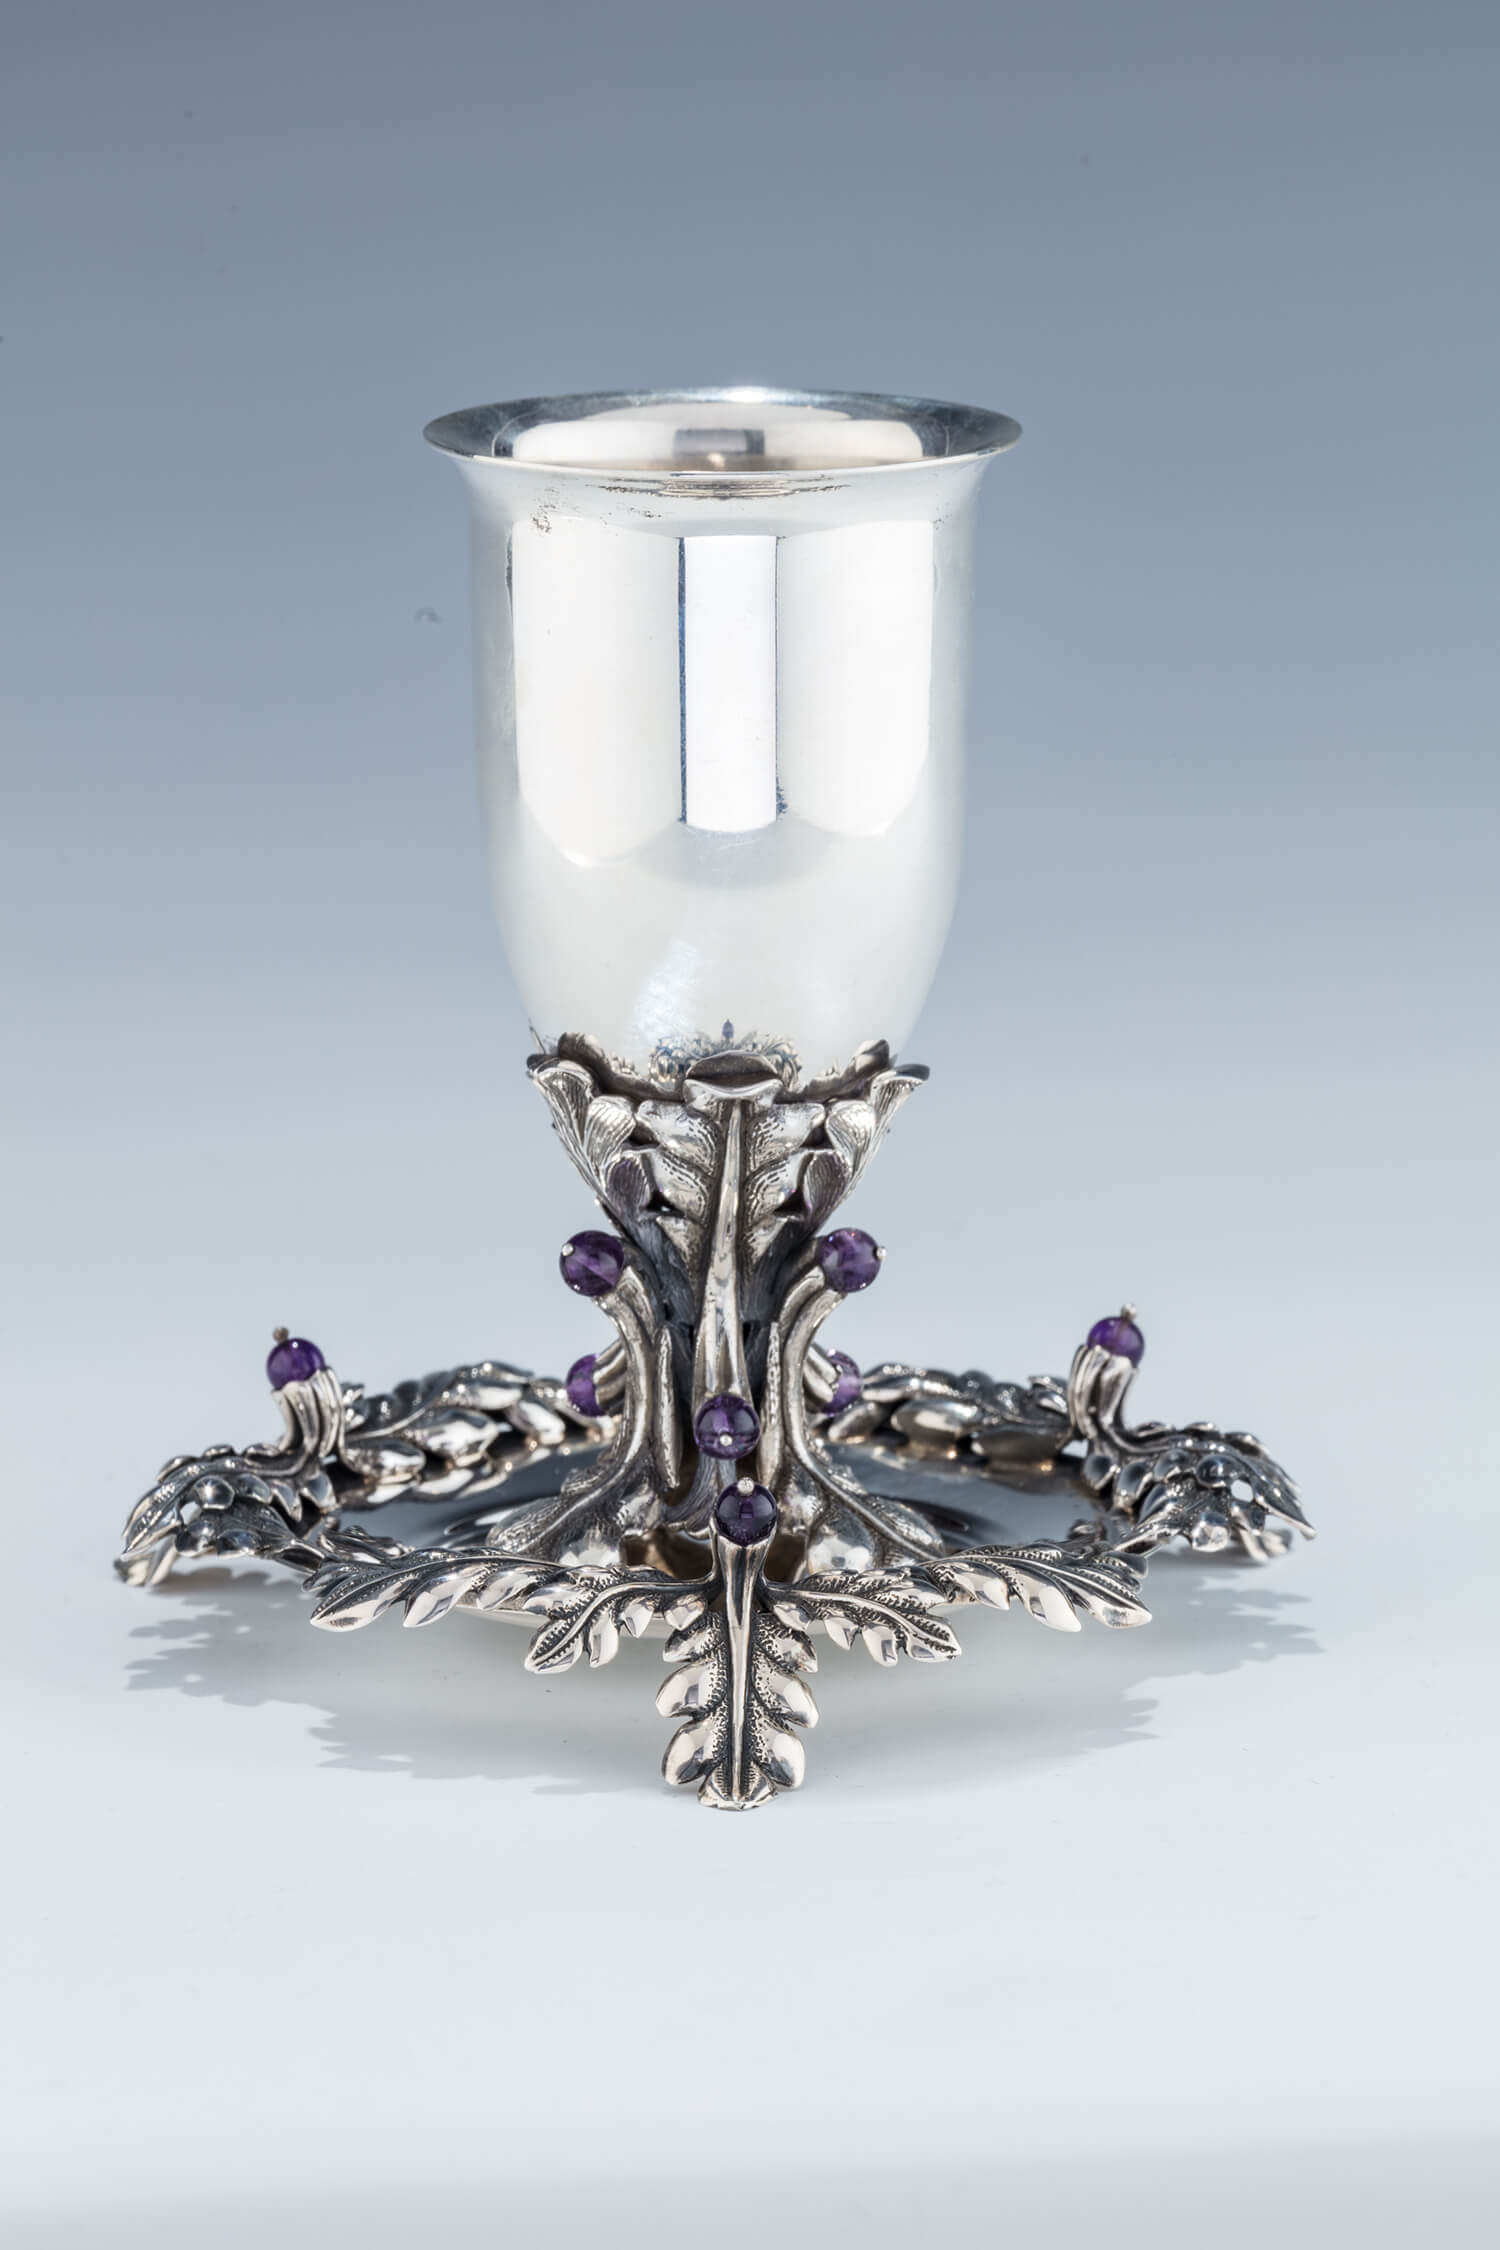 147. A MONUMENTAL STERLING SILVER SEDER EQUIPAGE BY SWED MASTER SILVERSMITHS